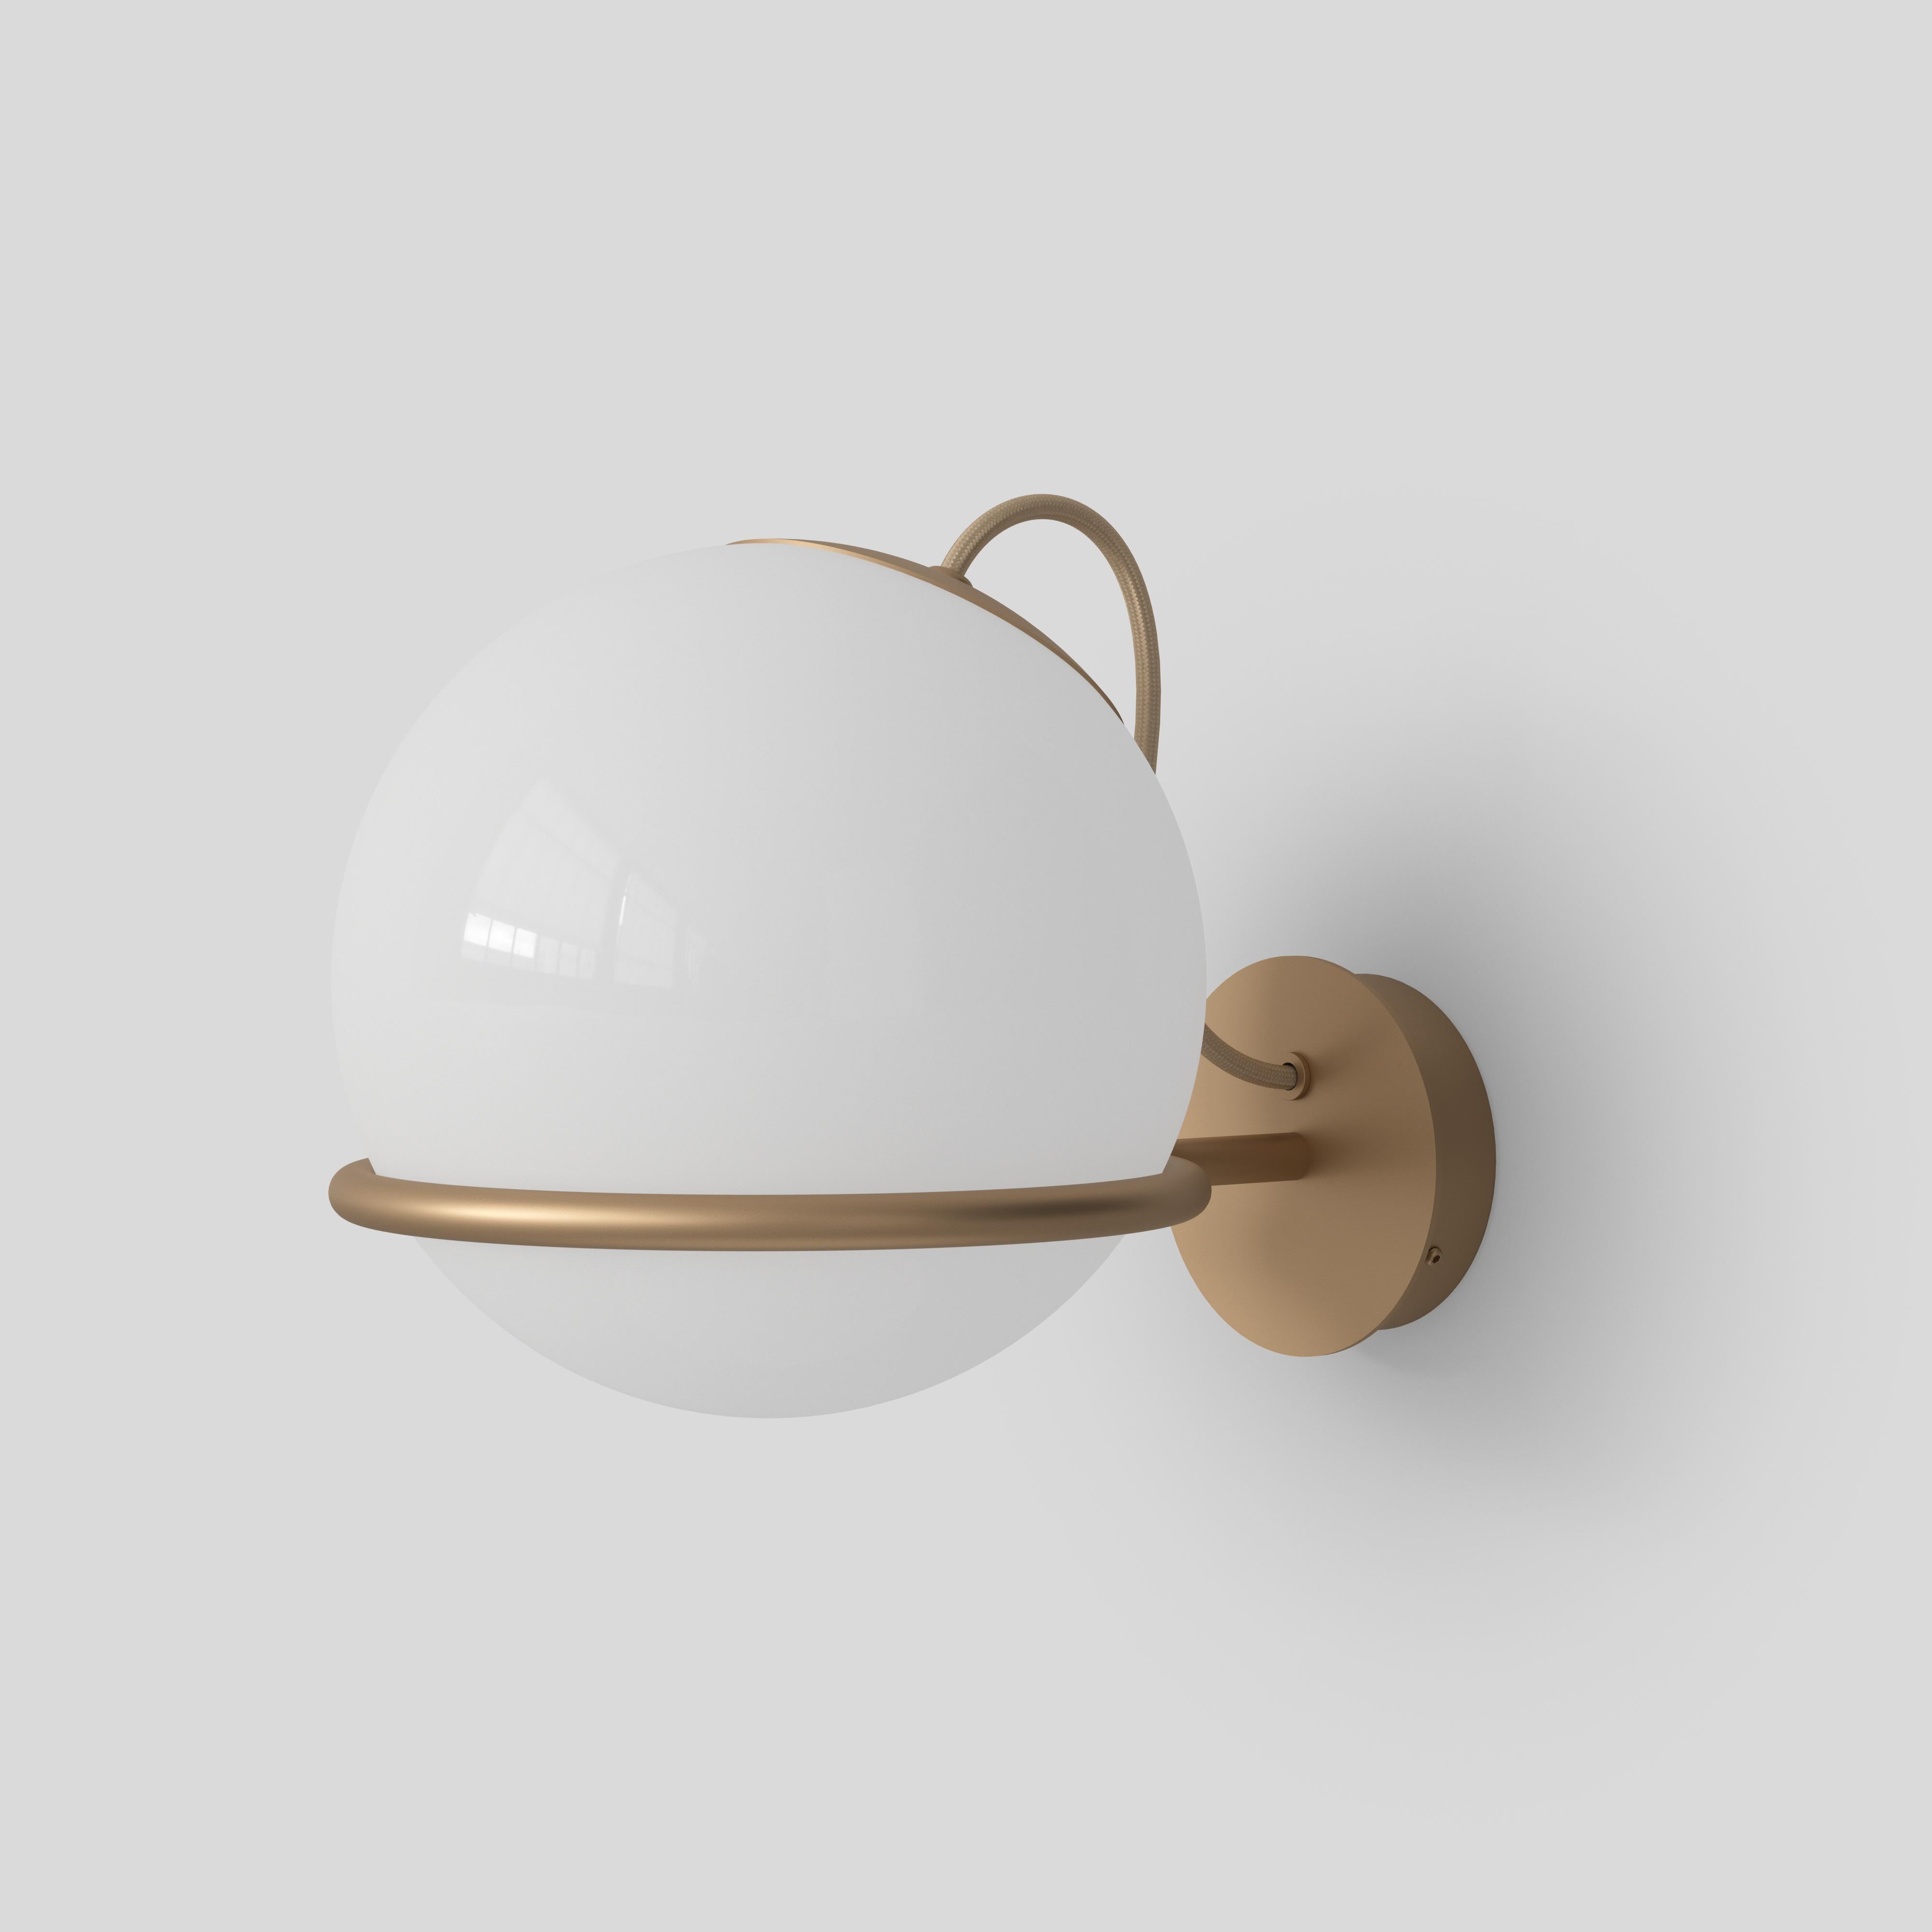 Model 237/1
Design by Gino Sarfatti
The single blown opaline glass sphere is gently held by a black or champagne painted aluminum ring. The aluminum ring has a small cut, enabling the sphere to be placed facing downward or upward and thus